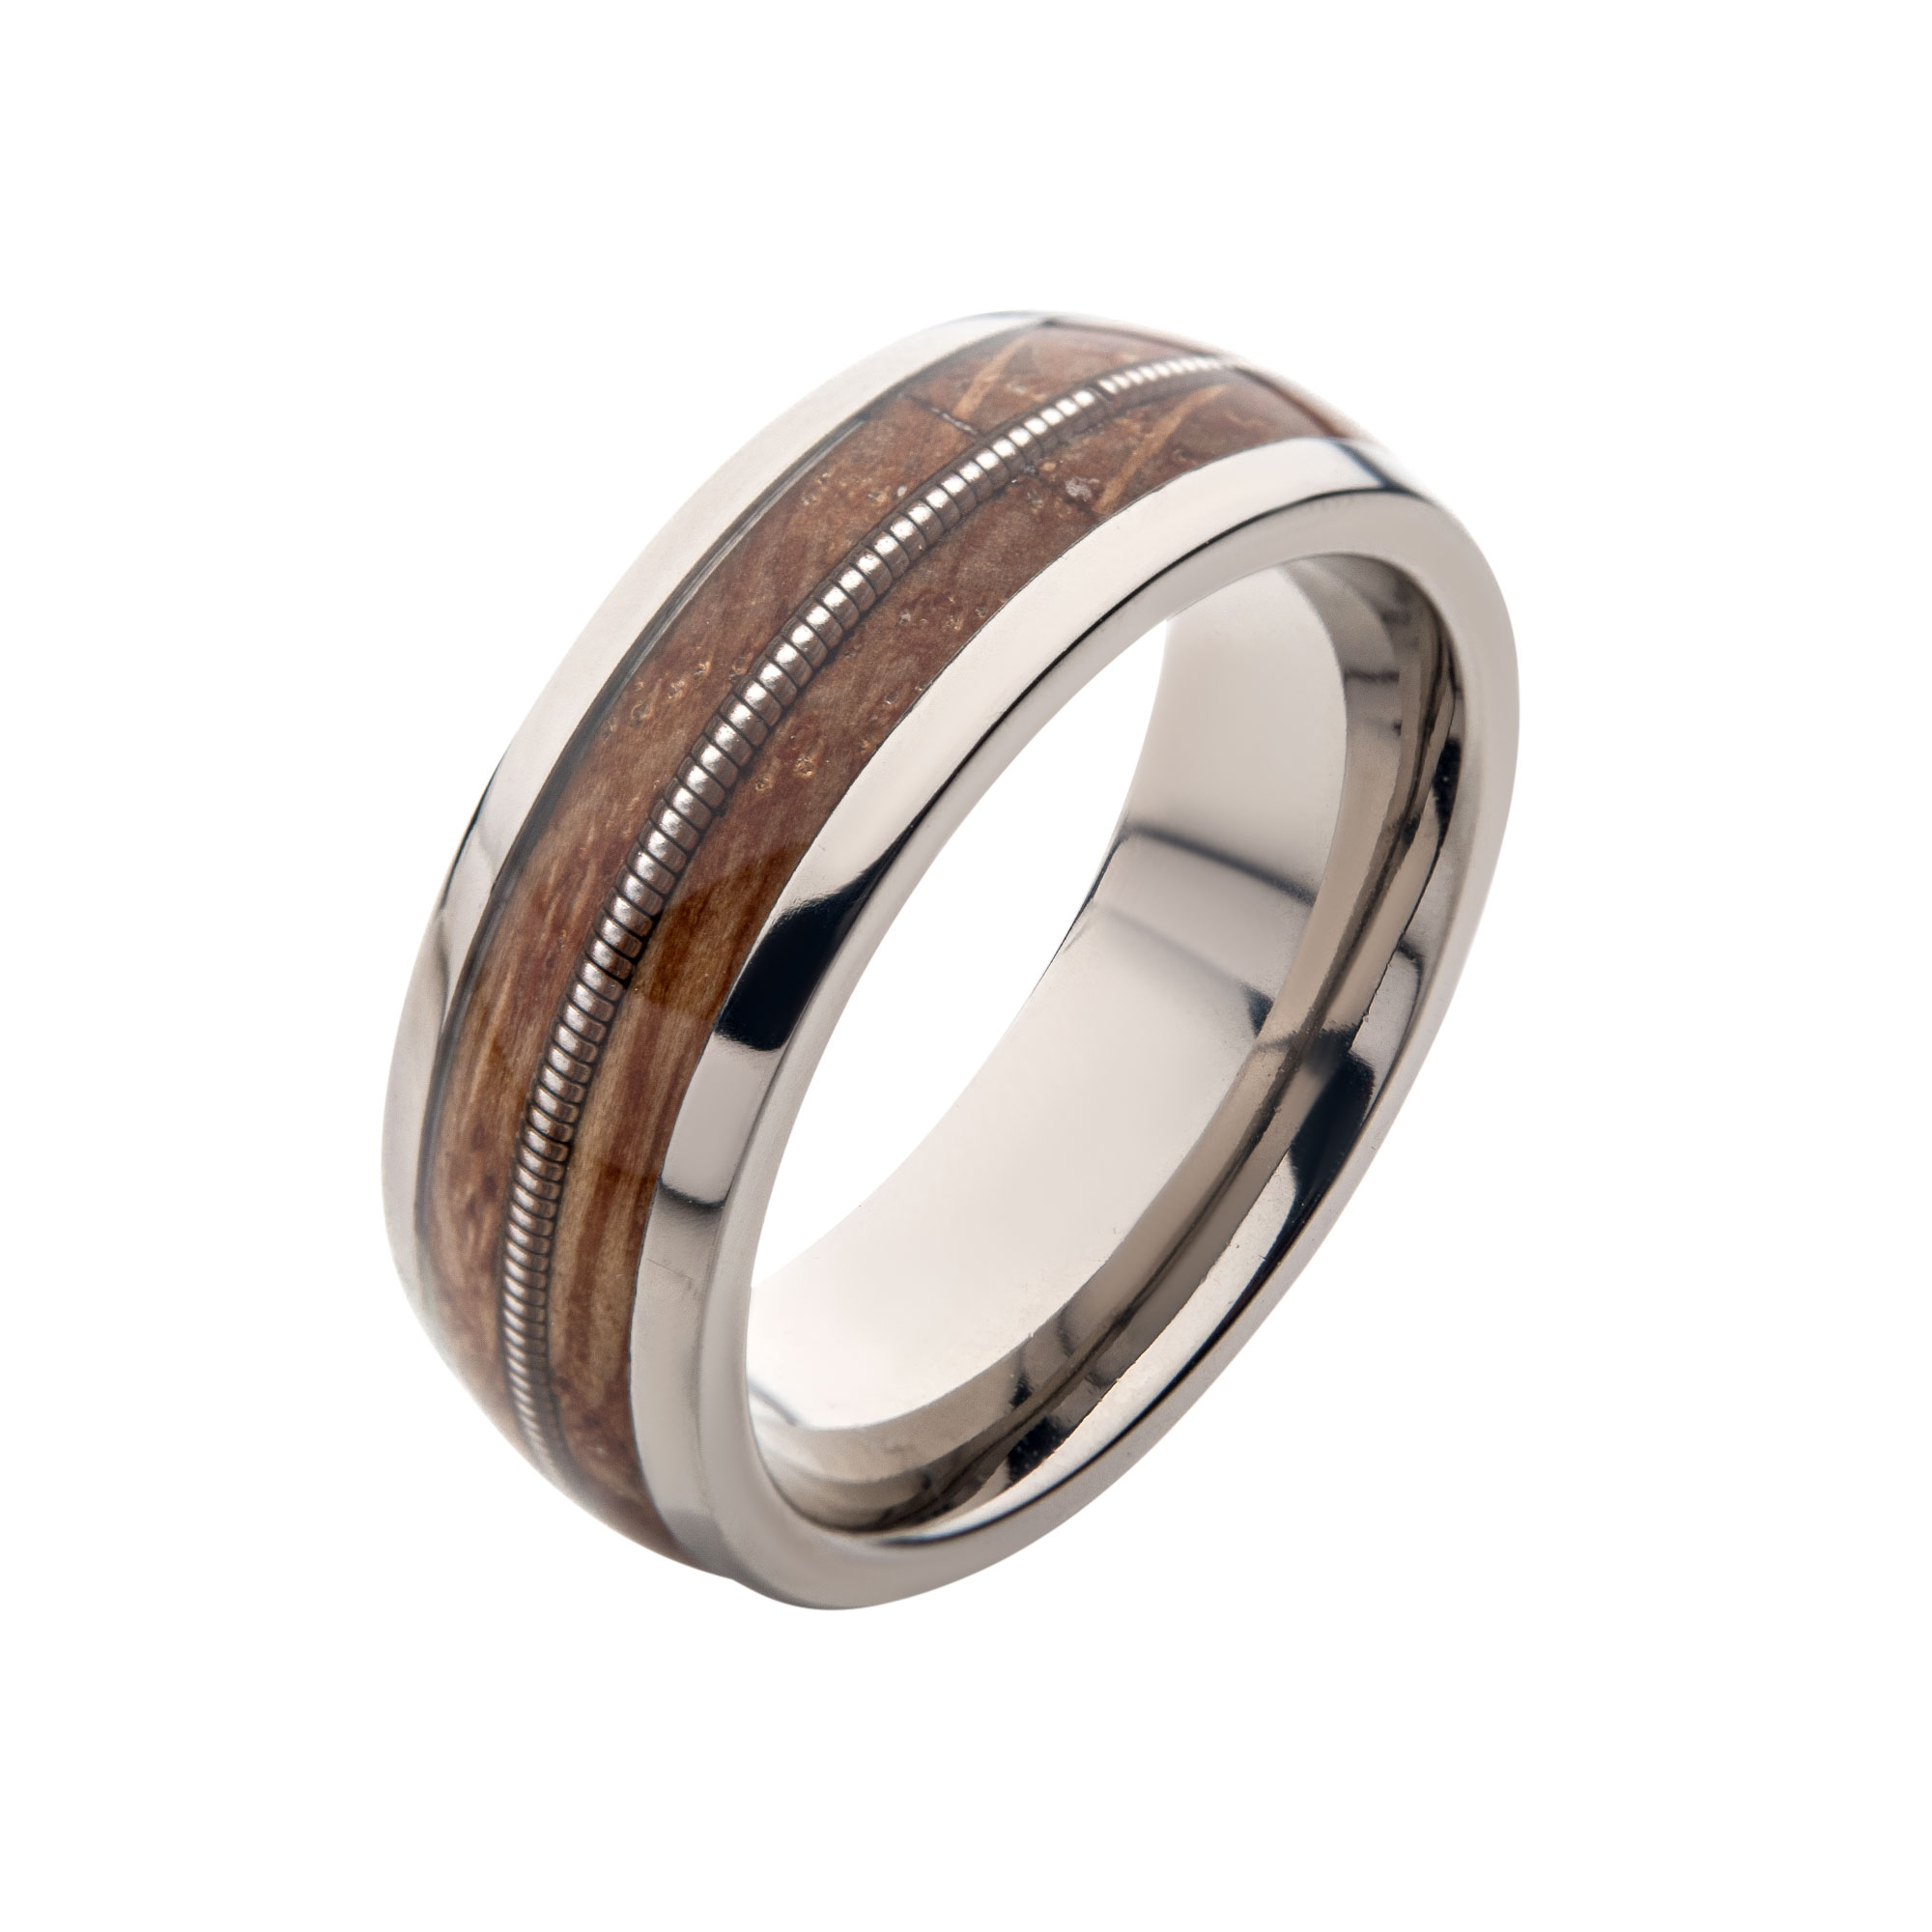 Clear Resins & Whiskey Barrel Wood Inlay Titanium Ring Enchanted Jewelry Plainfield, CT